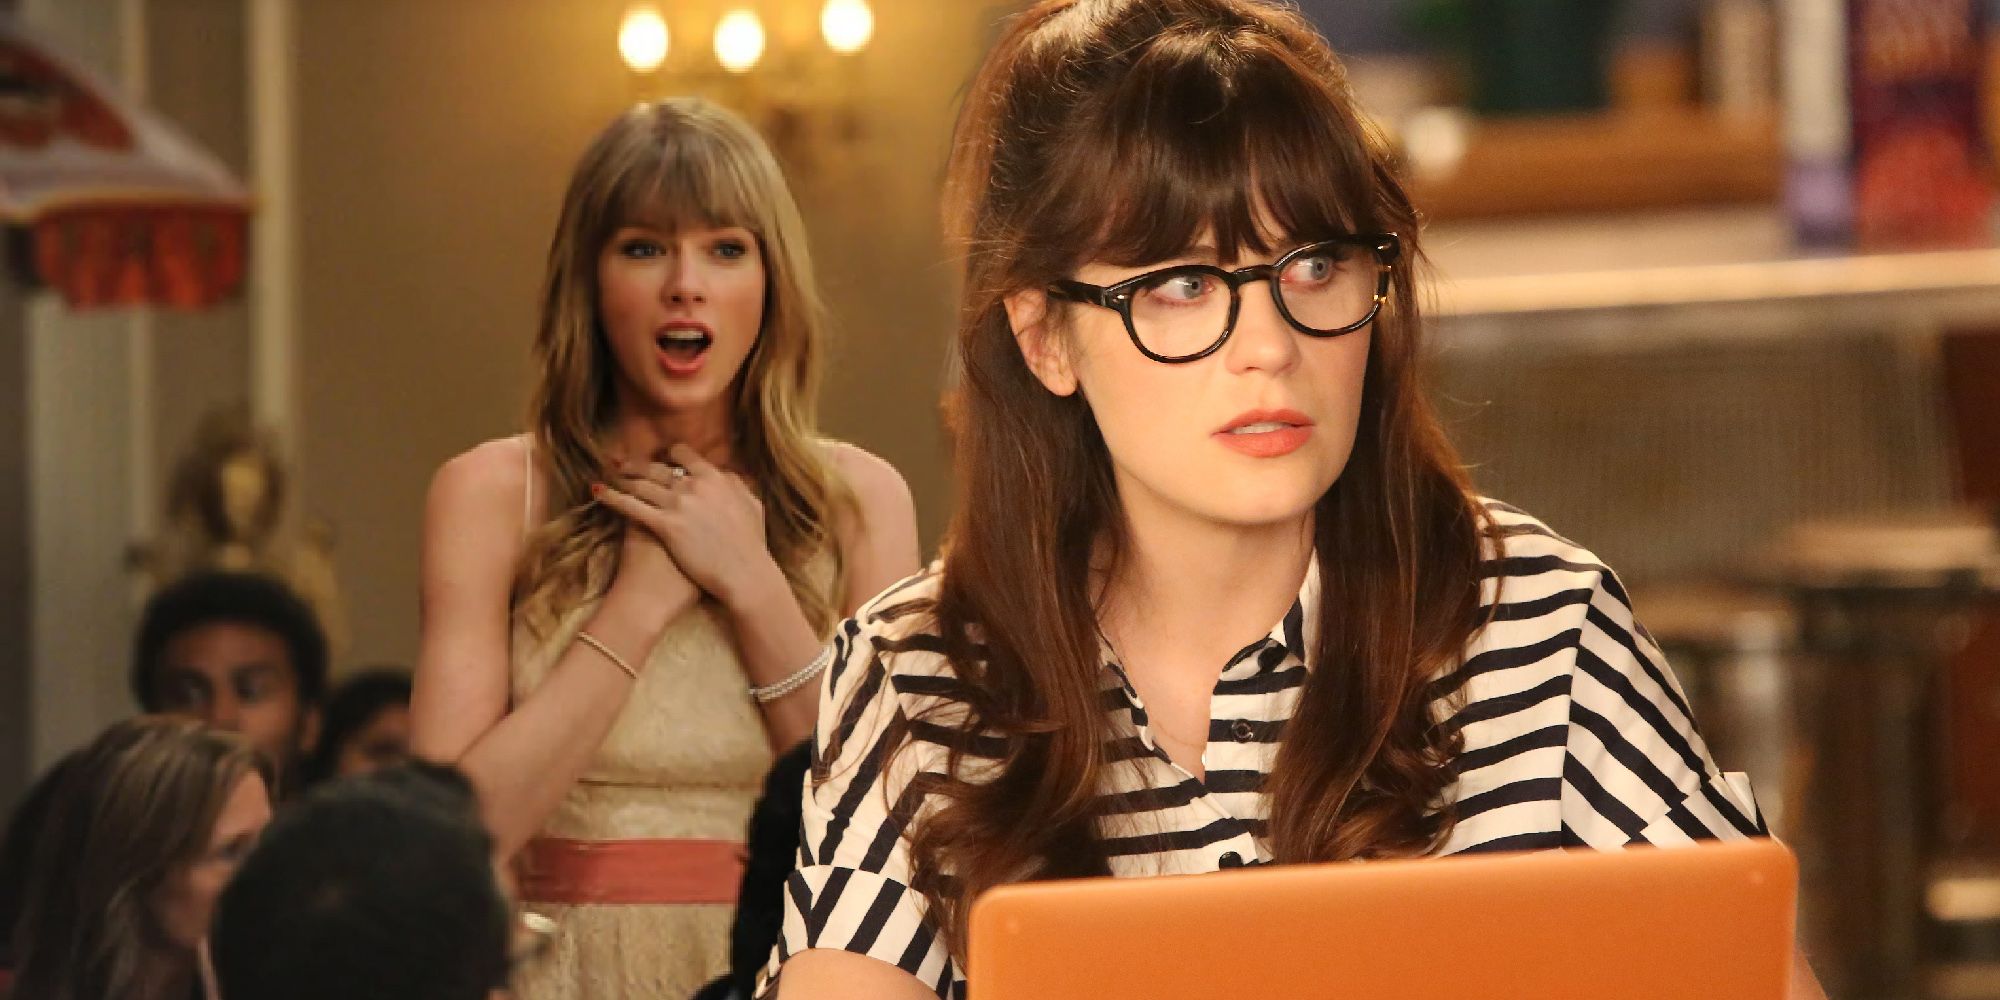  An image of Jess superimposed over Taylor Swift in New Girl